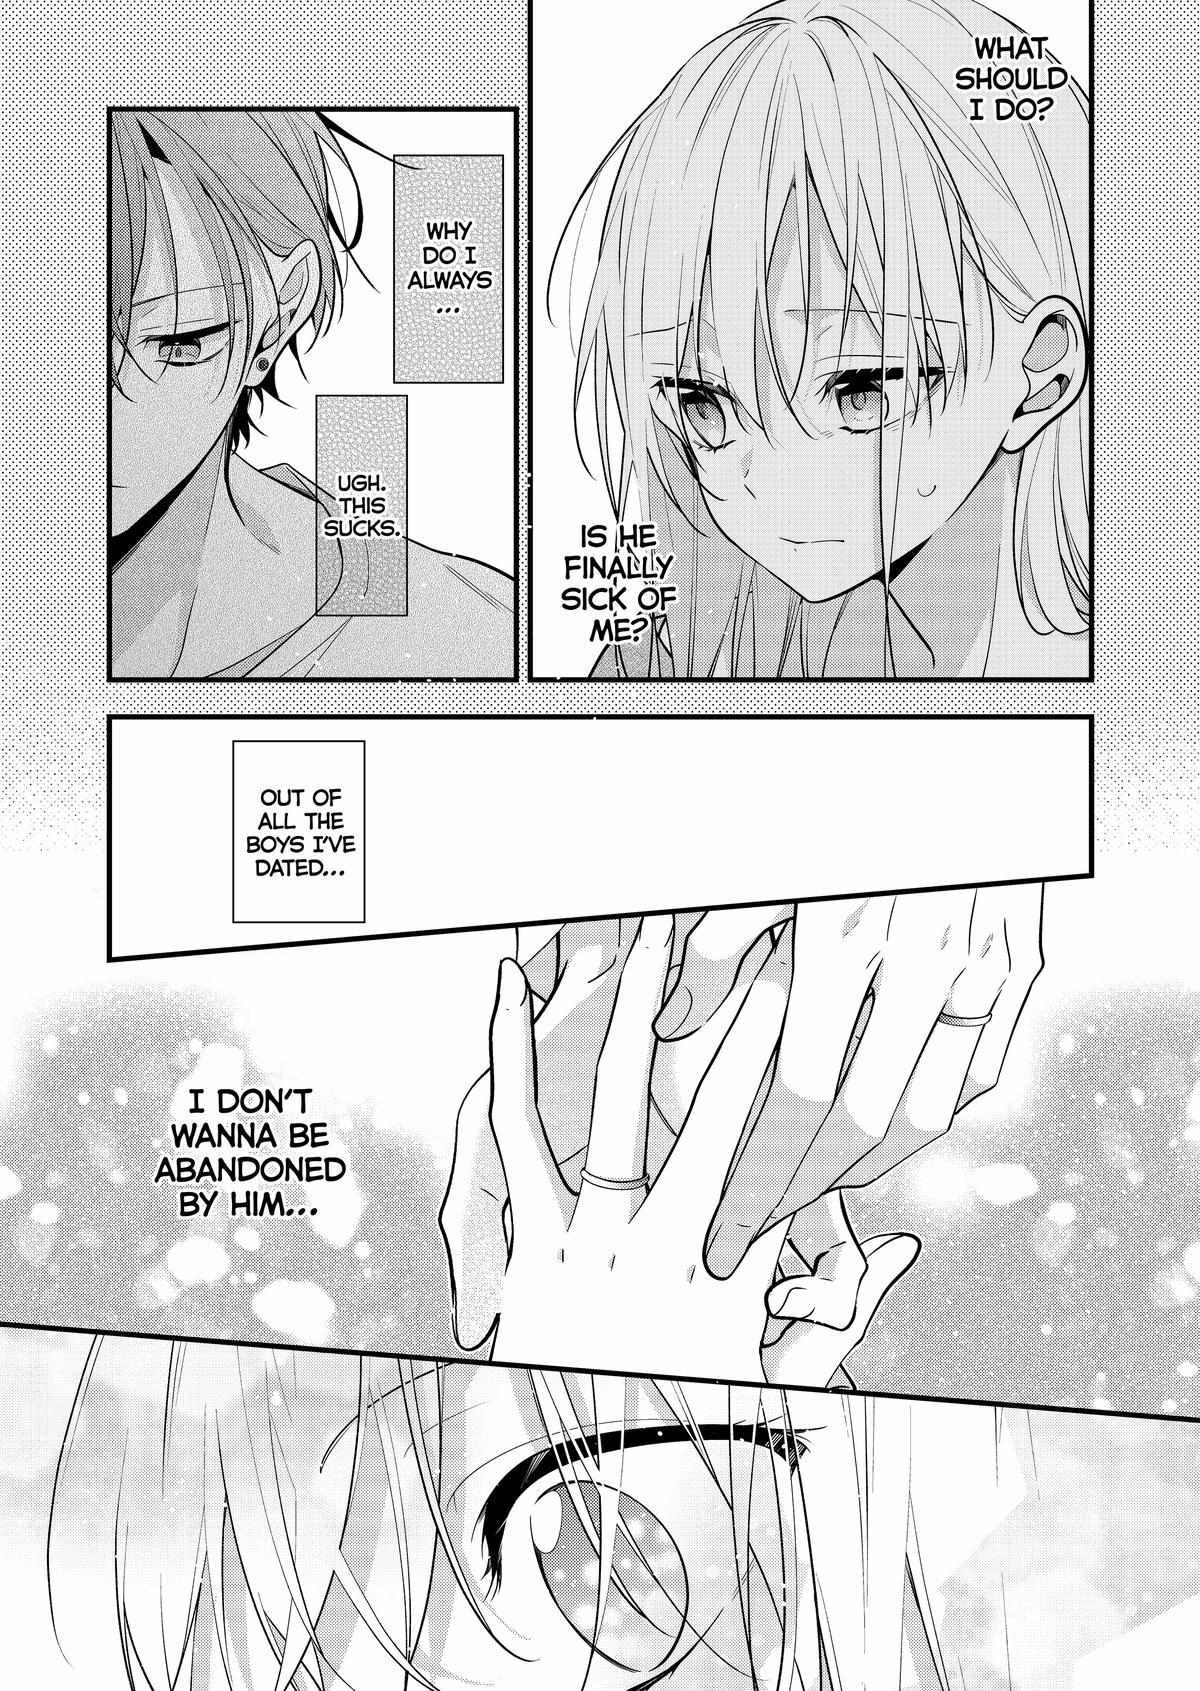 The Story Of A Guy Who Fell In Love With His Friend's Sister - Page 3